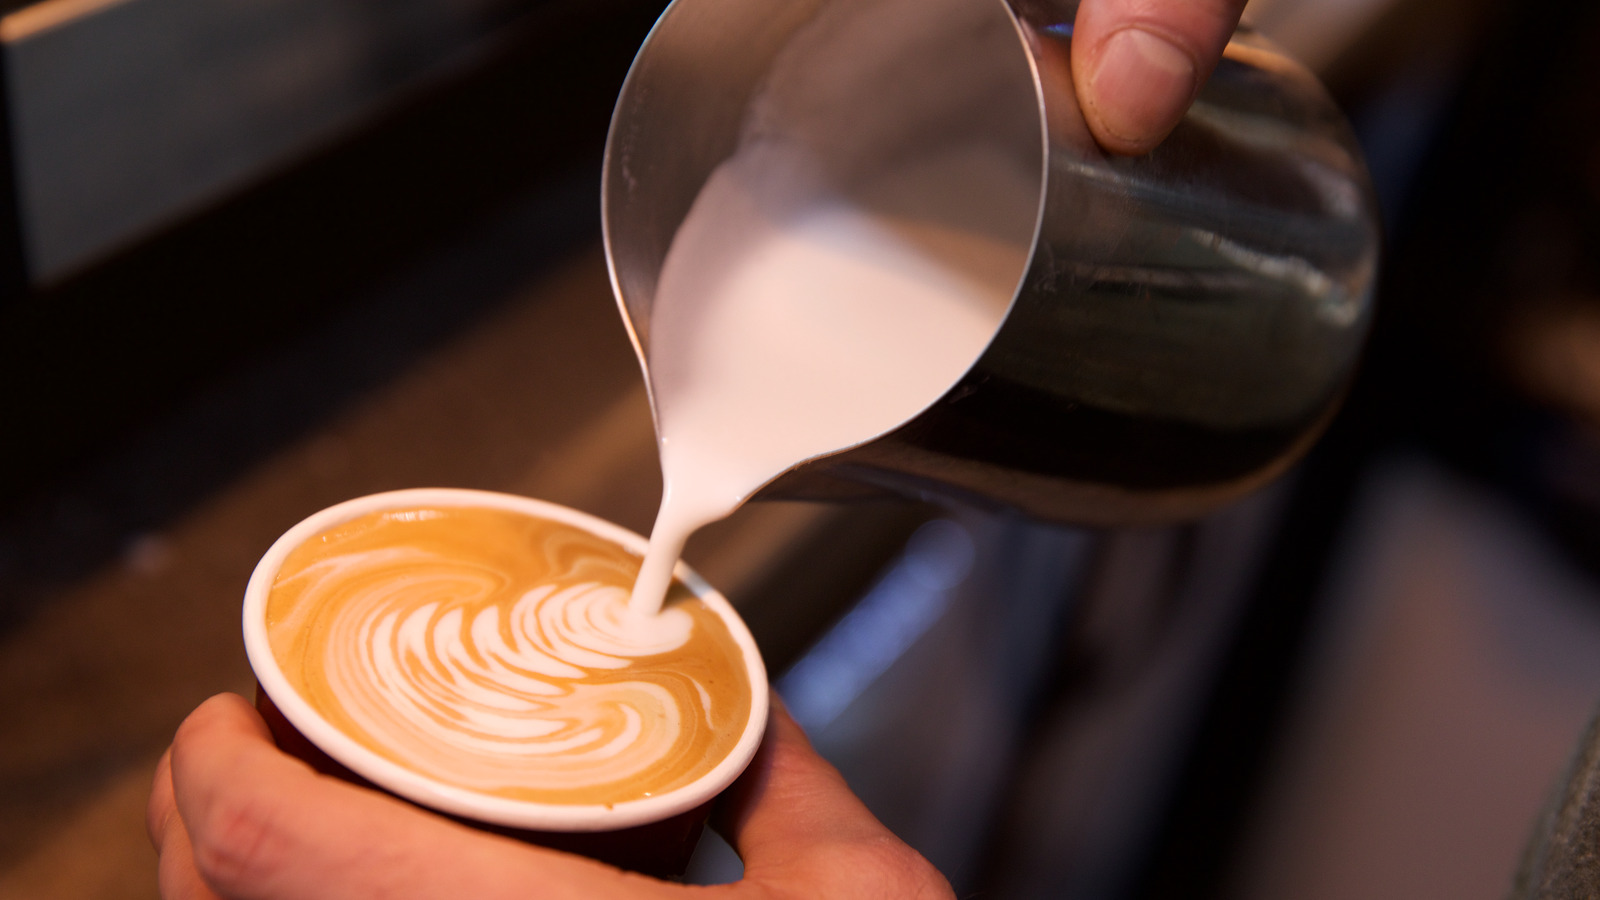 Is it time to stop steaming milk for coffee?